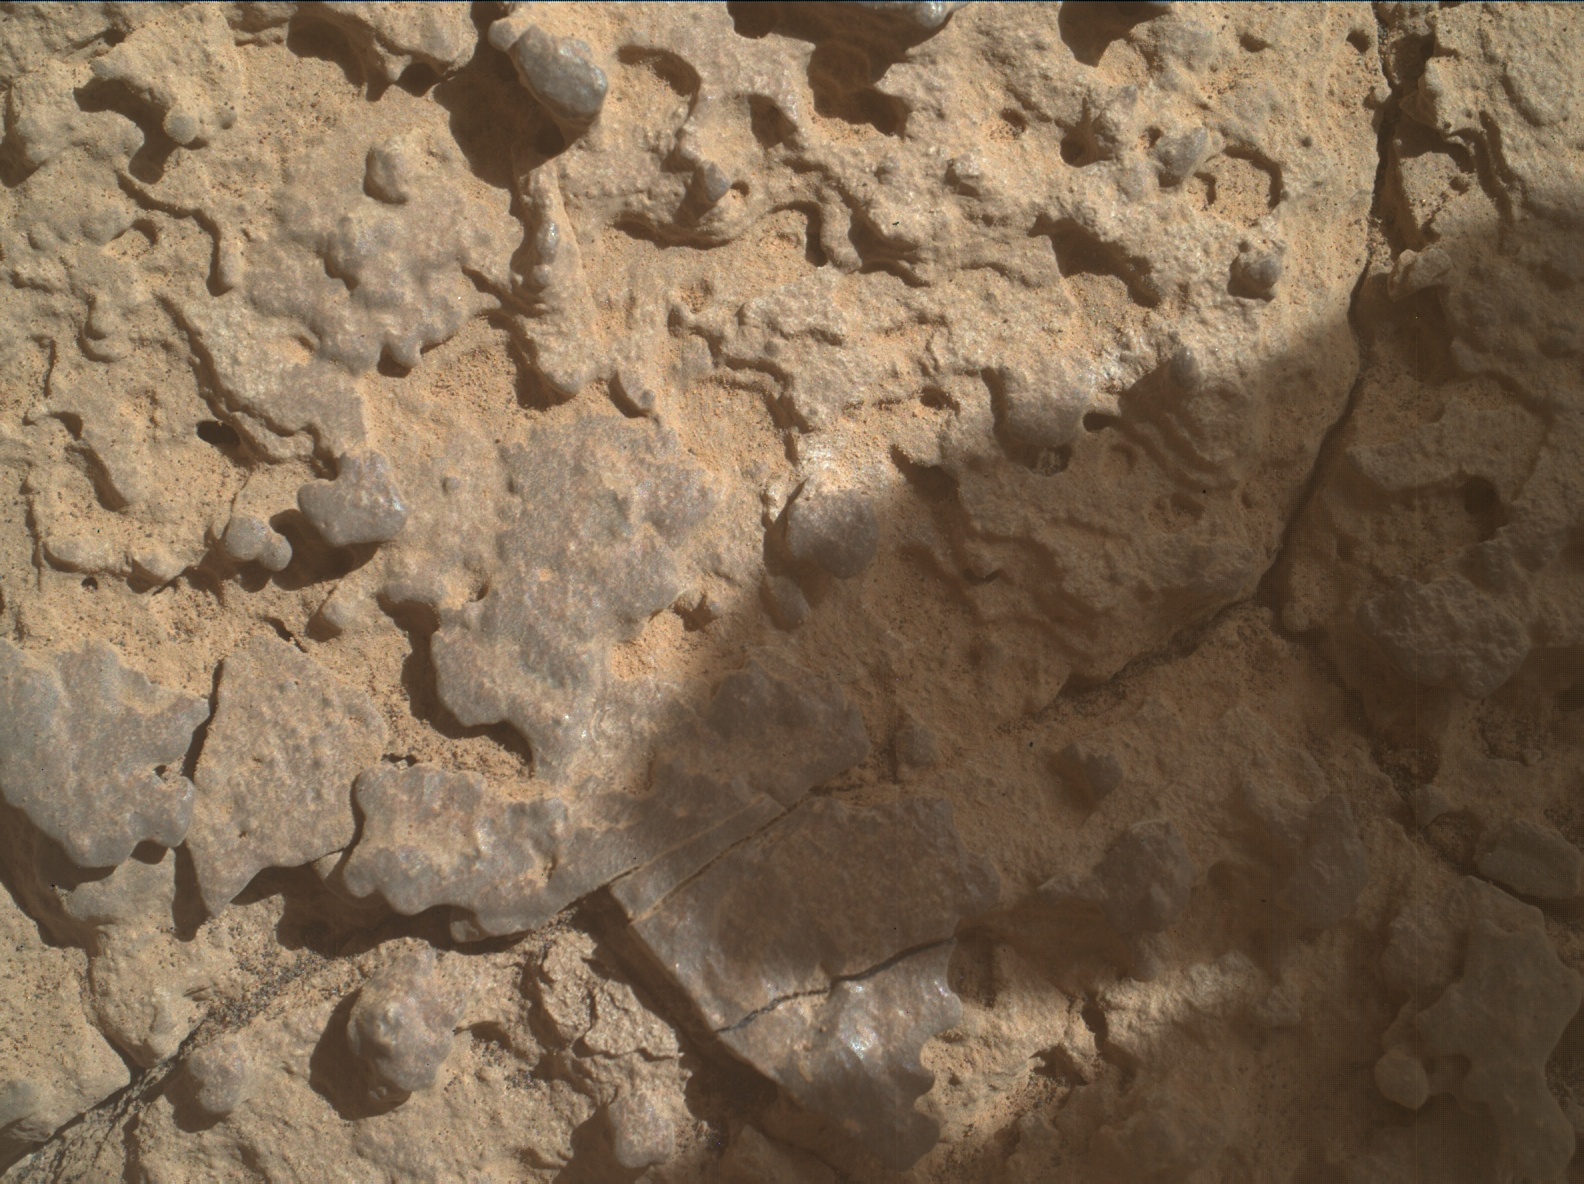 Nasa's Mars rover Curiosity acquired this image using its Mars Hand Lens Imager (MAHLI) on Sol 3912